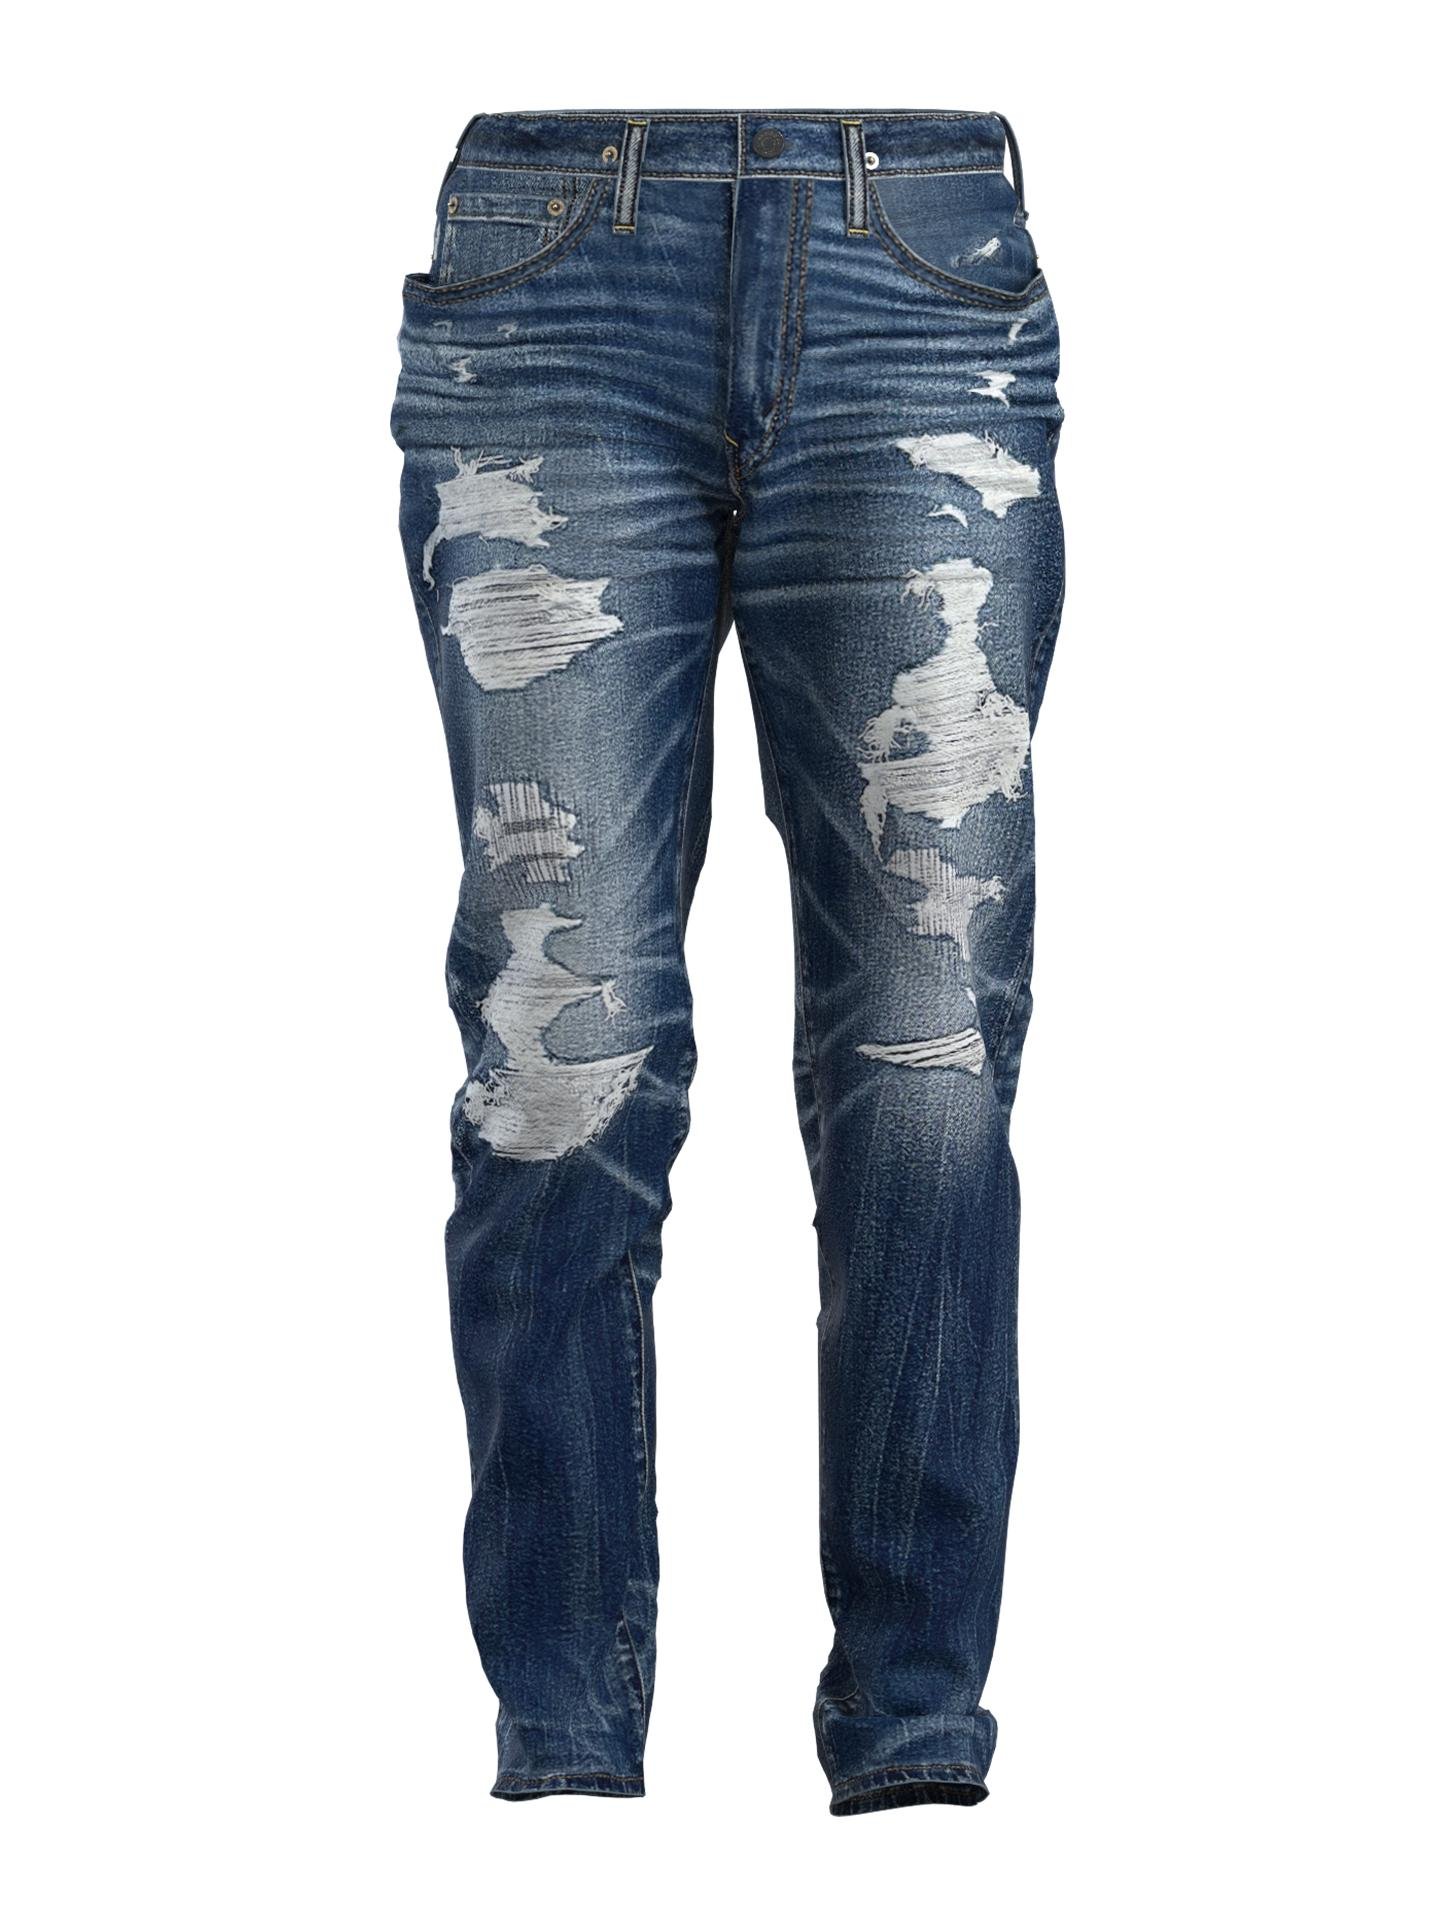 “H2O” Athletic Skinny Jean by AMERICAN EAGLE